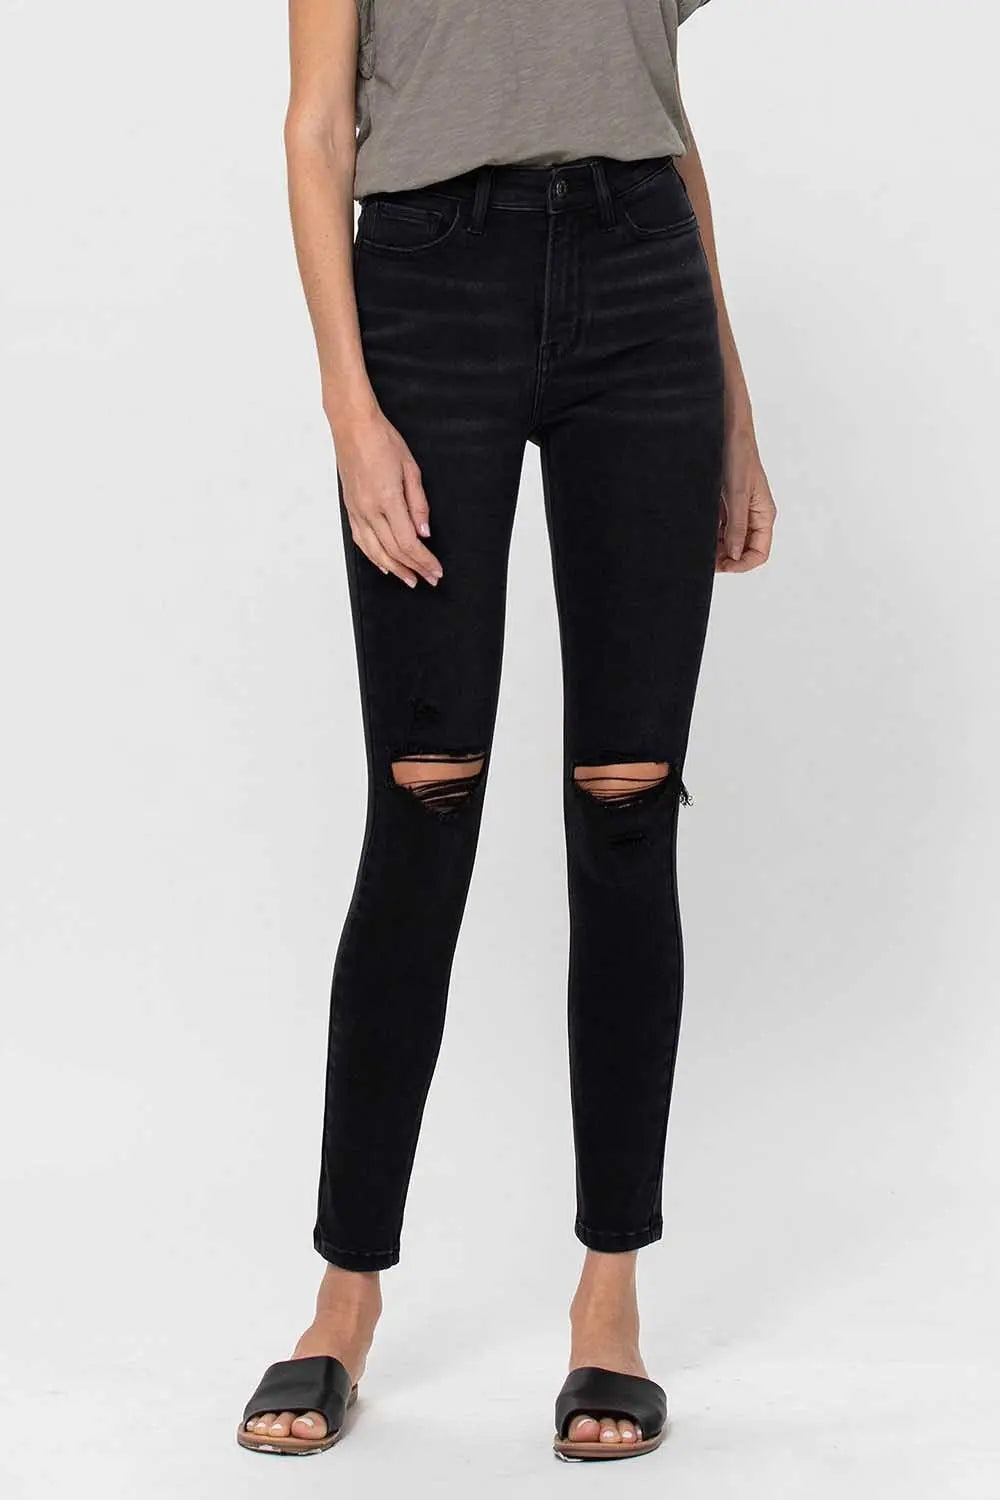 THE TABITHA HIGH RISE DISTRESSED SKINNY JEANS